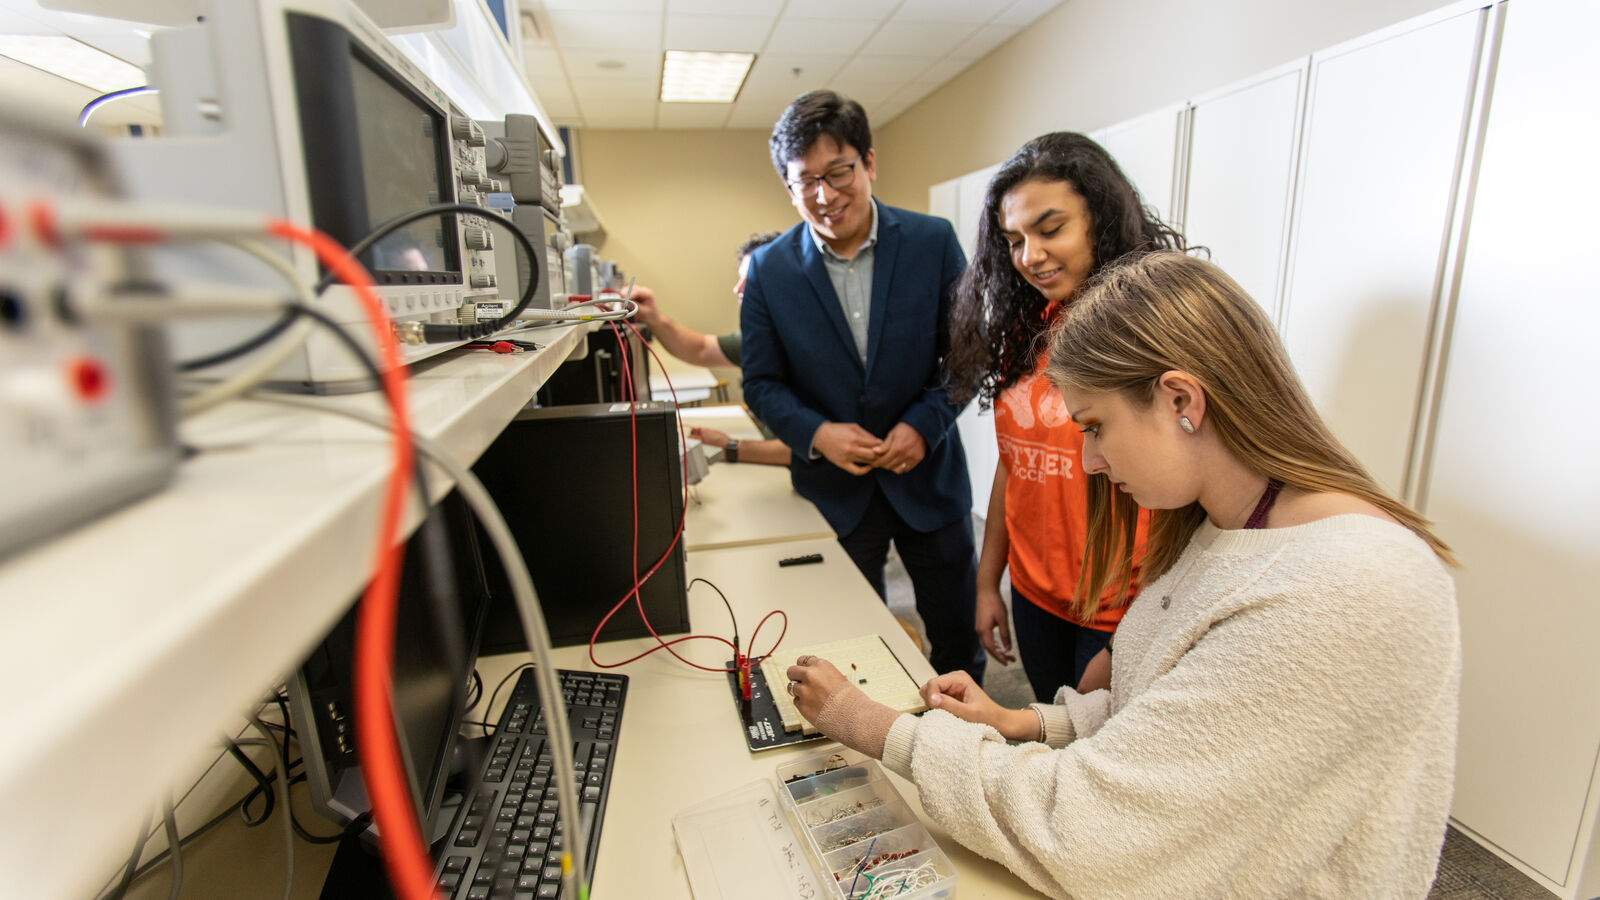 Professor and computer engineering students interact on an electric engineering project